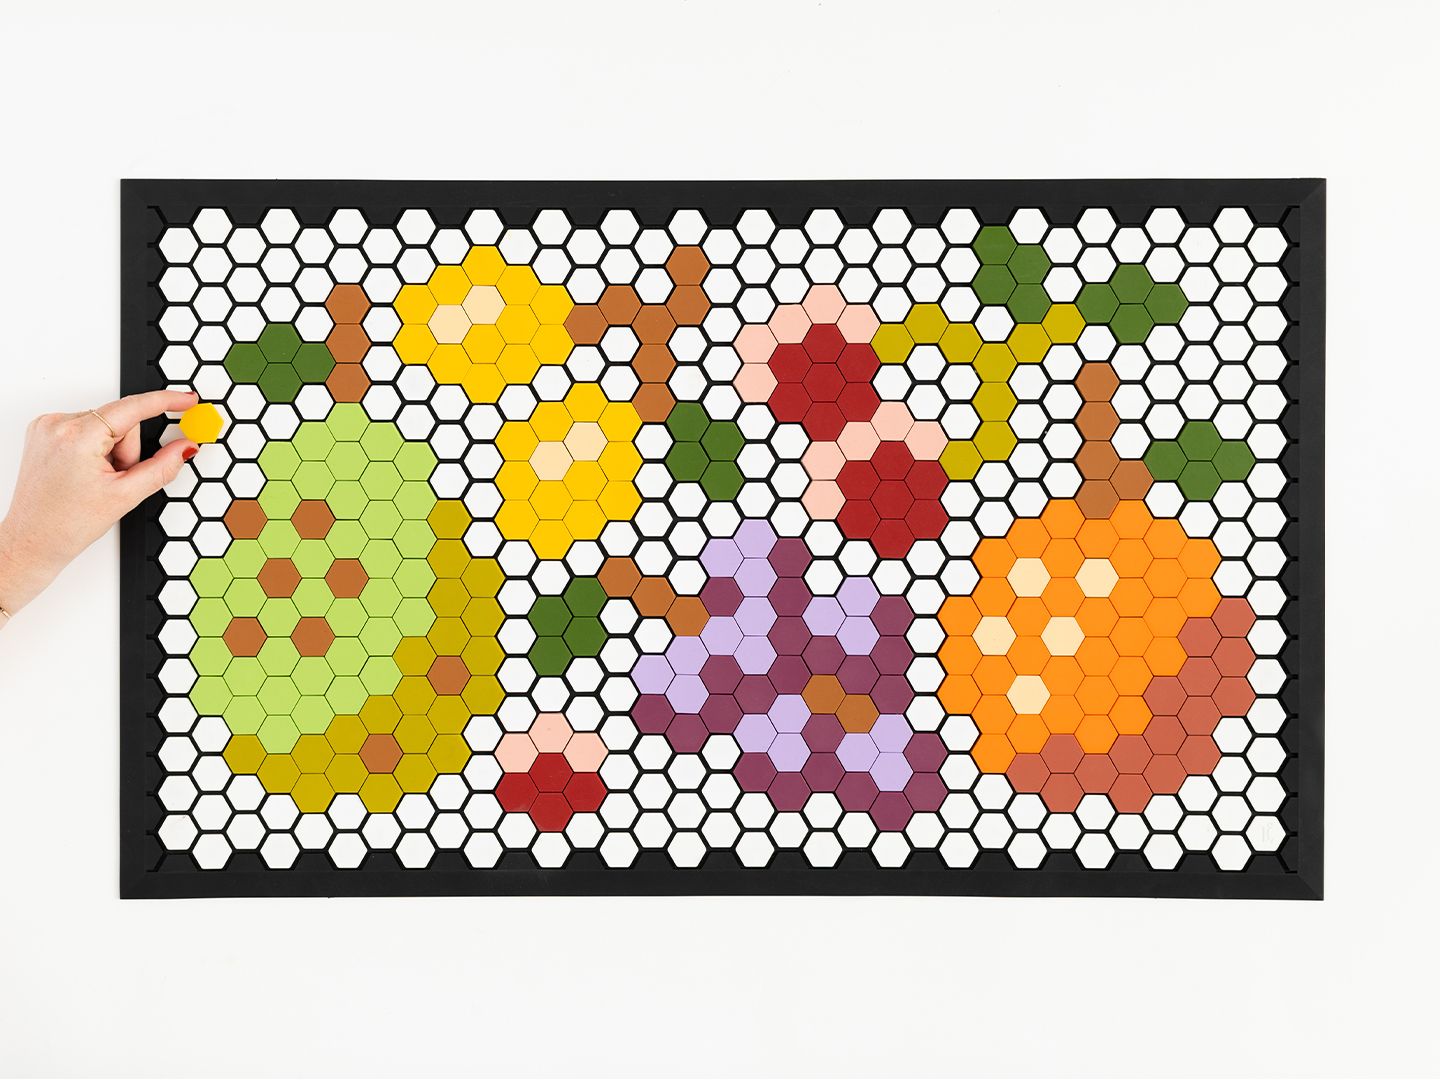 Tile mat with colorful fruit designs